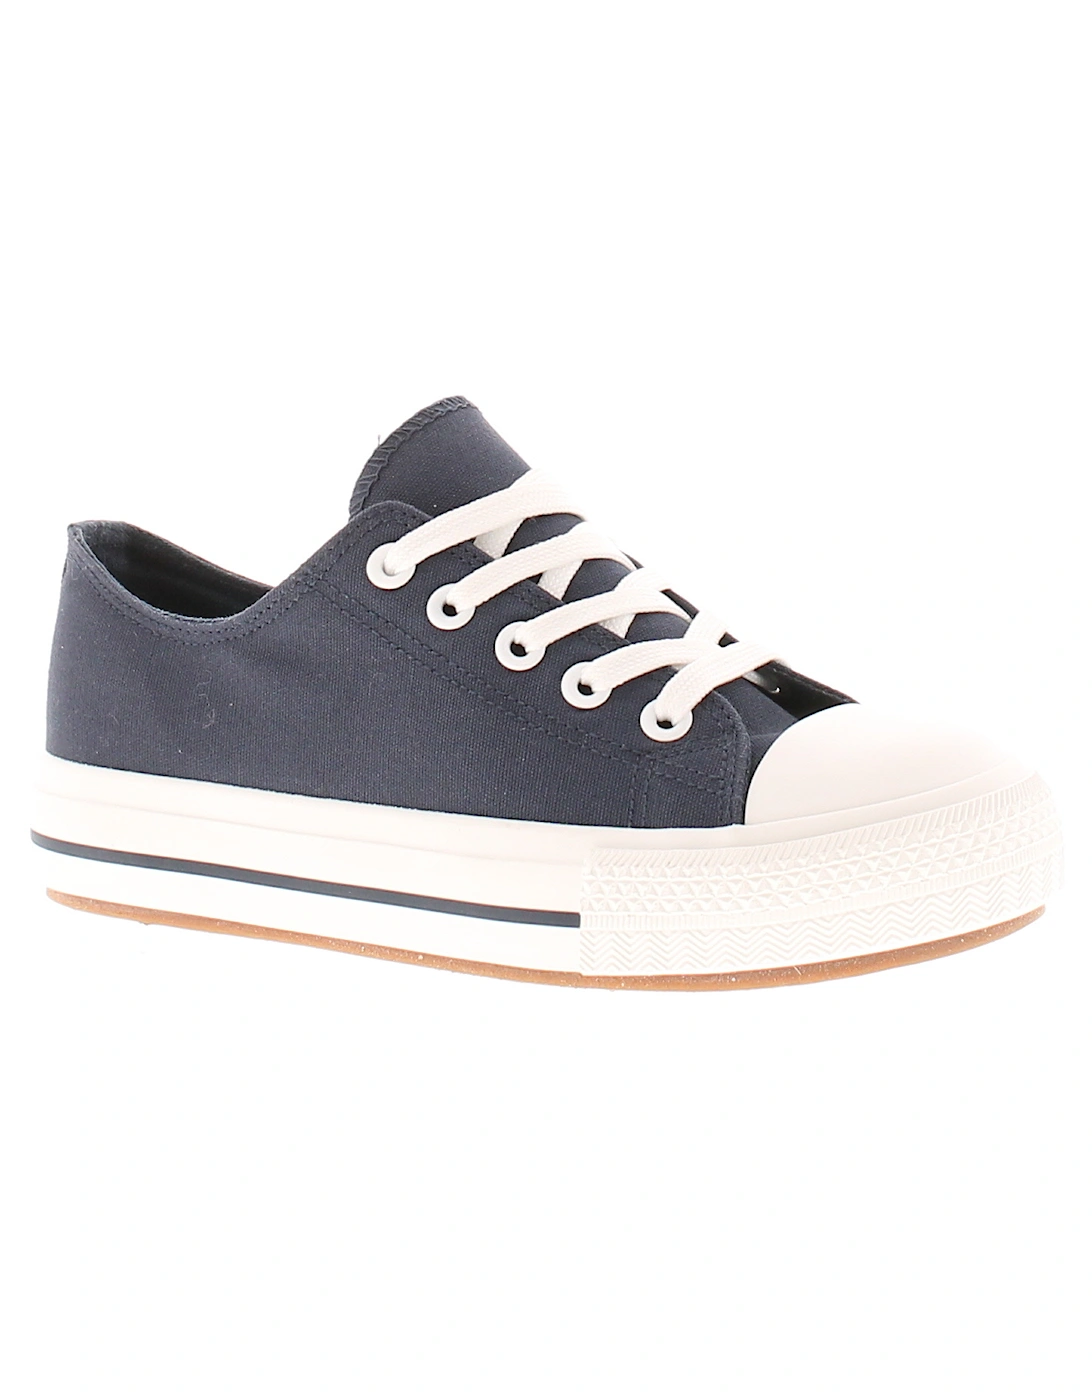 Younger Boys Pumps Canvas Shoes vinny navy UK Size, 6 of 5